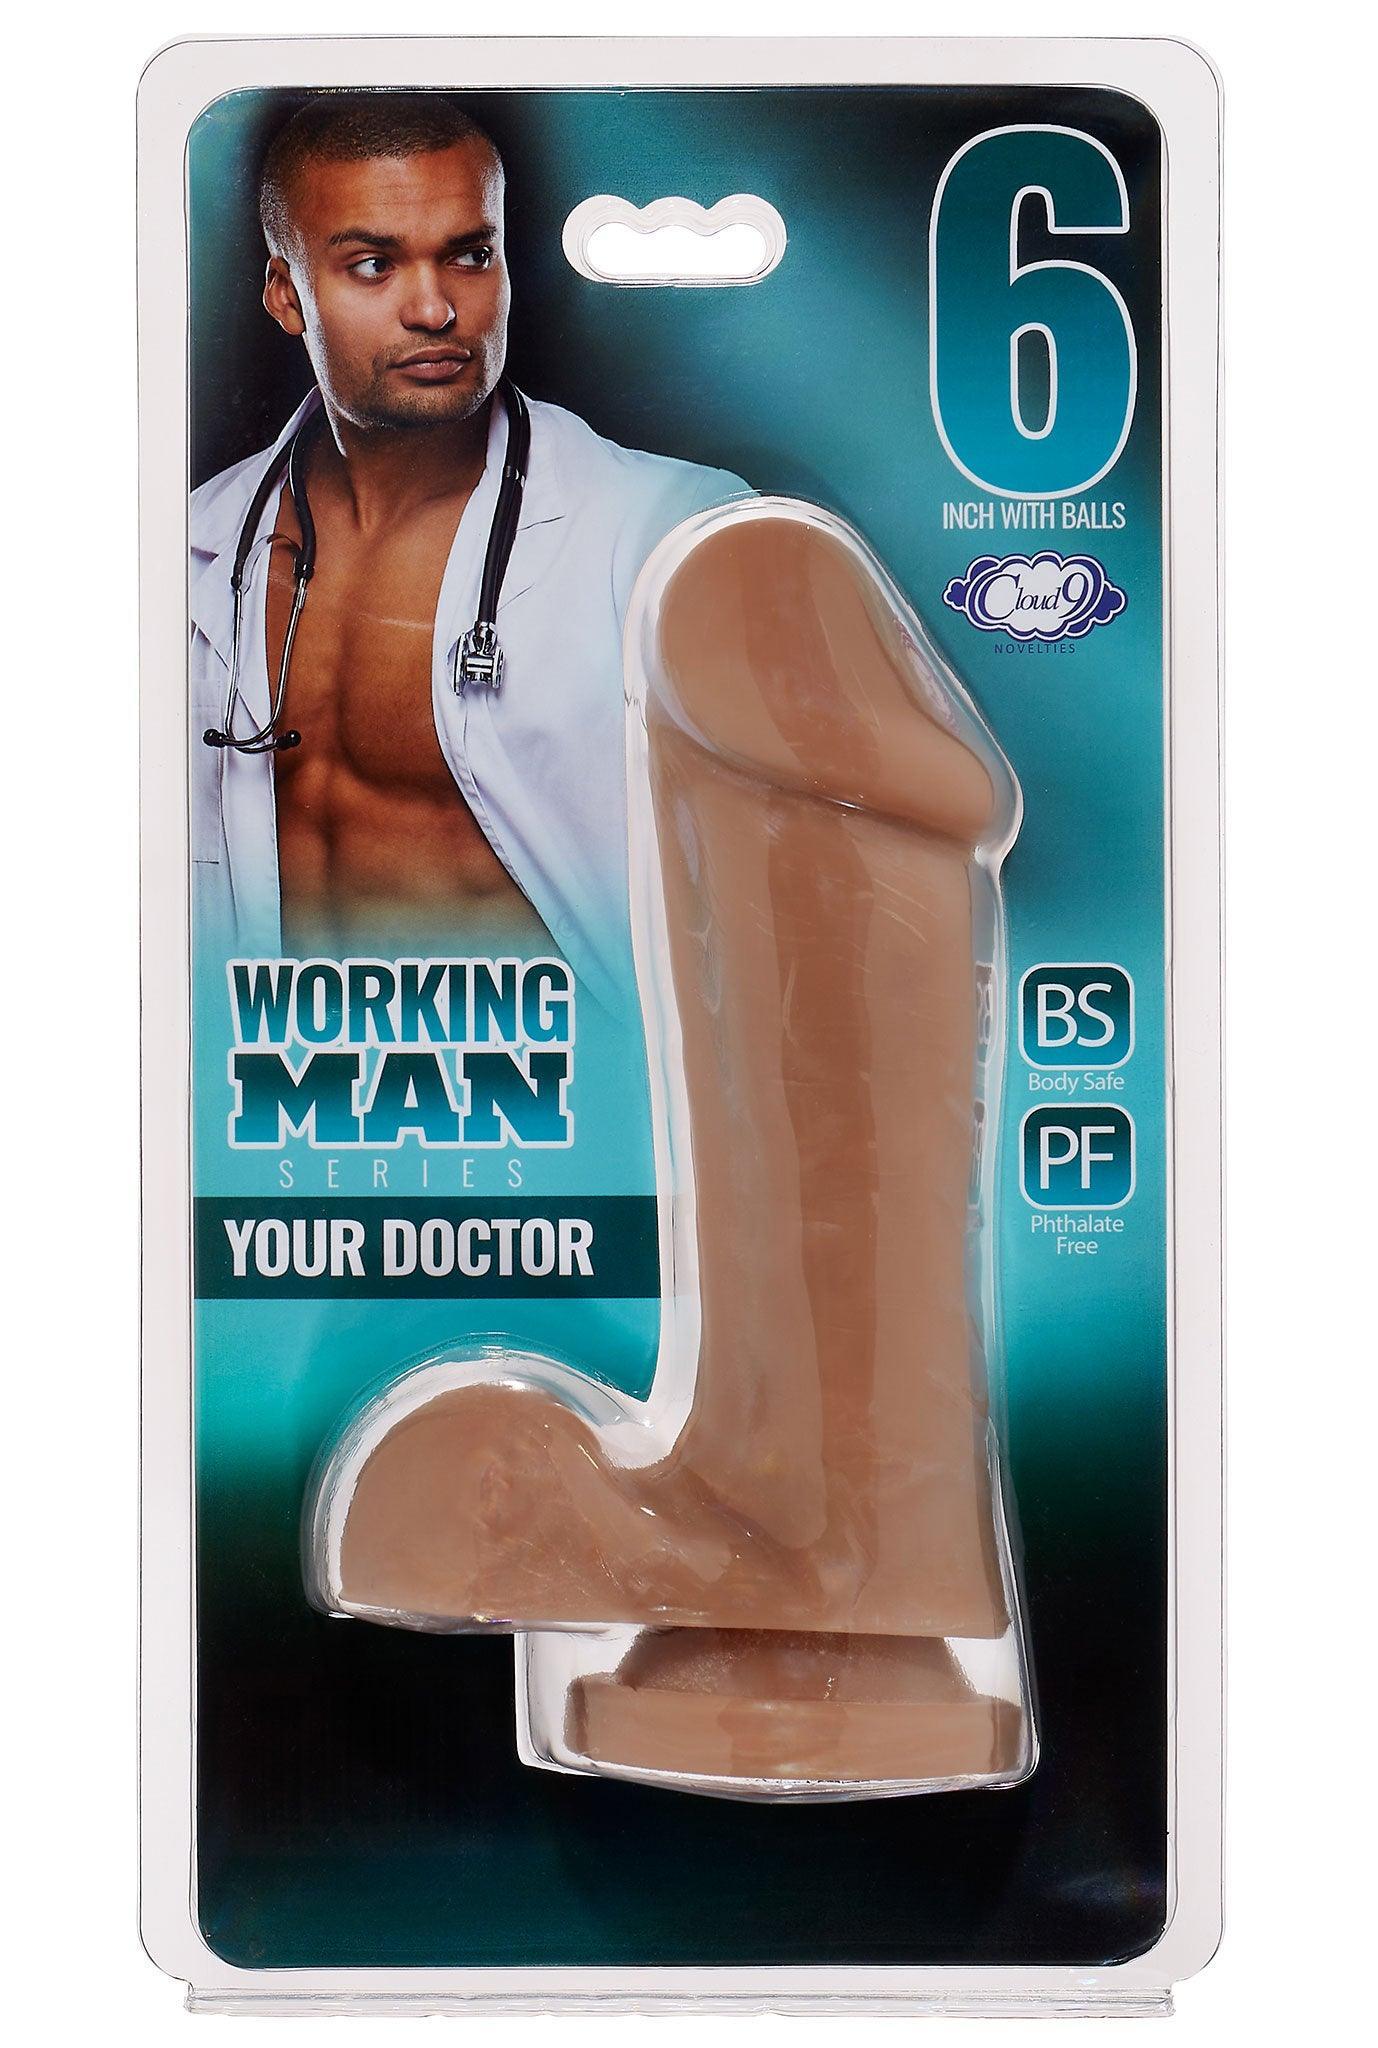 Cloud 9 Working Man 6 Inch With Balls - Your Doctor - Tan - My Sex Toy Hub